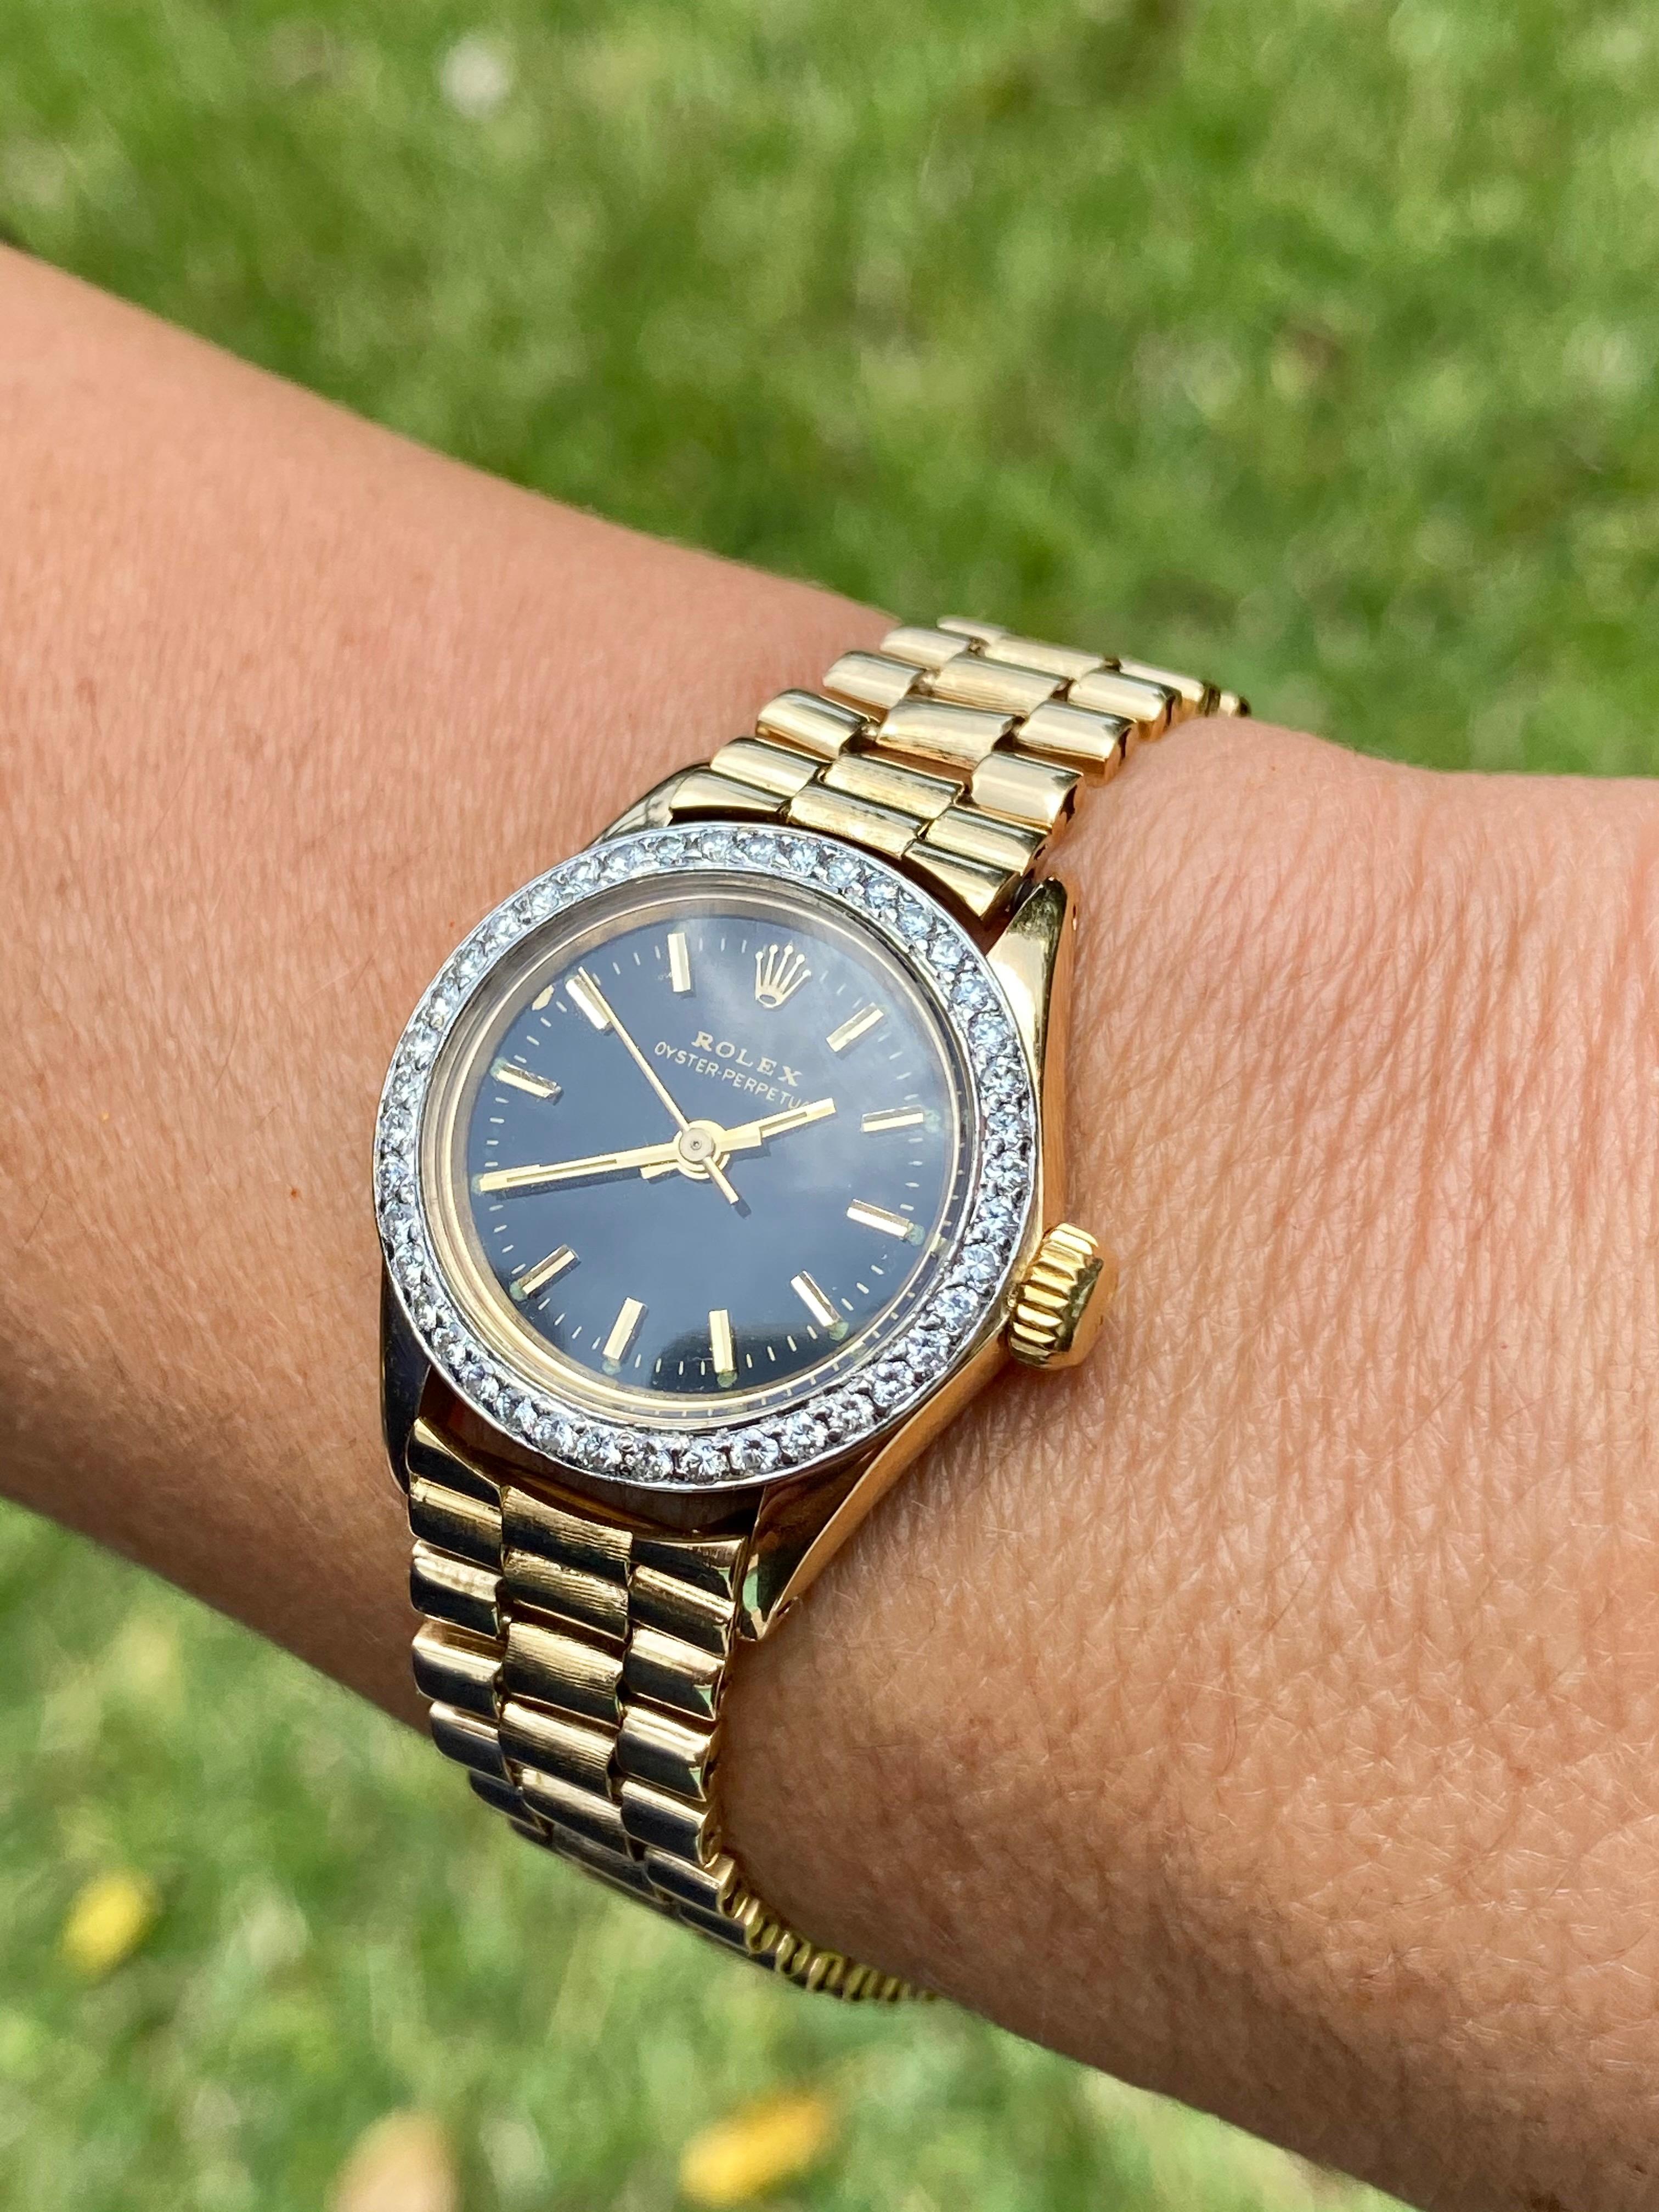 A Rolex Oyster Perpetual Watch Co. 18k gold wristwatch, rhodium-plated cal. 1400 movement with Jubilee bracelet, stick marker textured Black dial with stick hands. The bezel is adorned by 1.10 carats of natural round Diamonds. 

Details:
✔ Watch